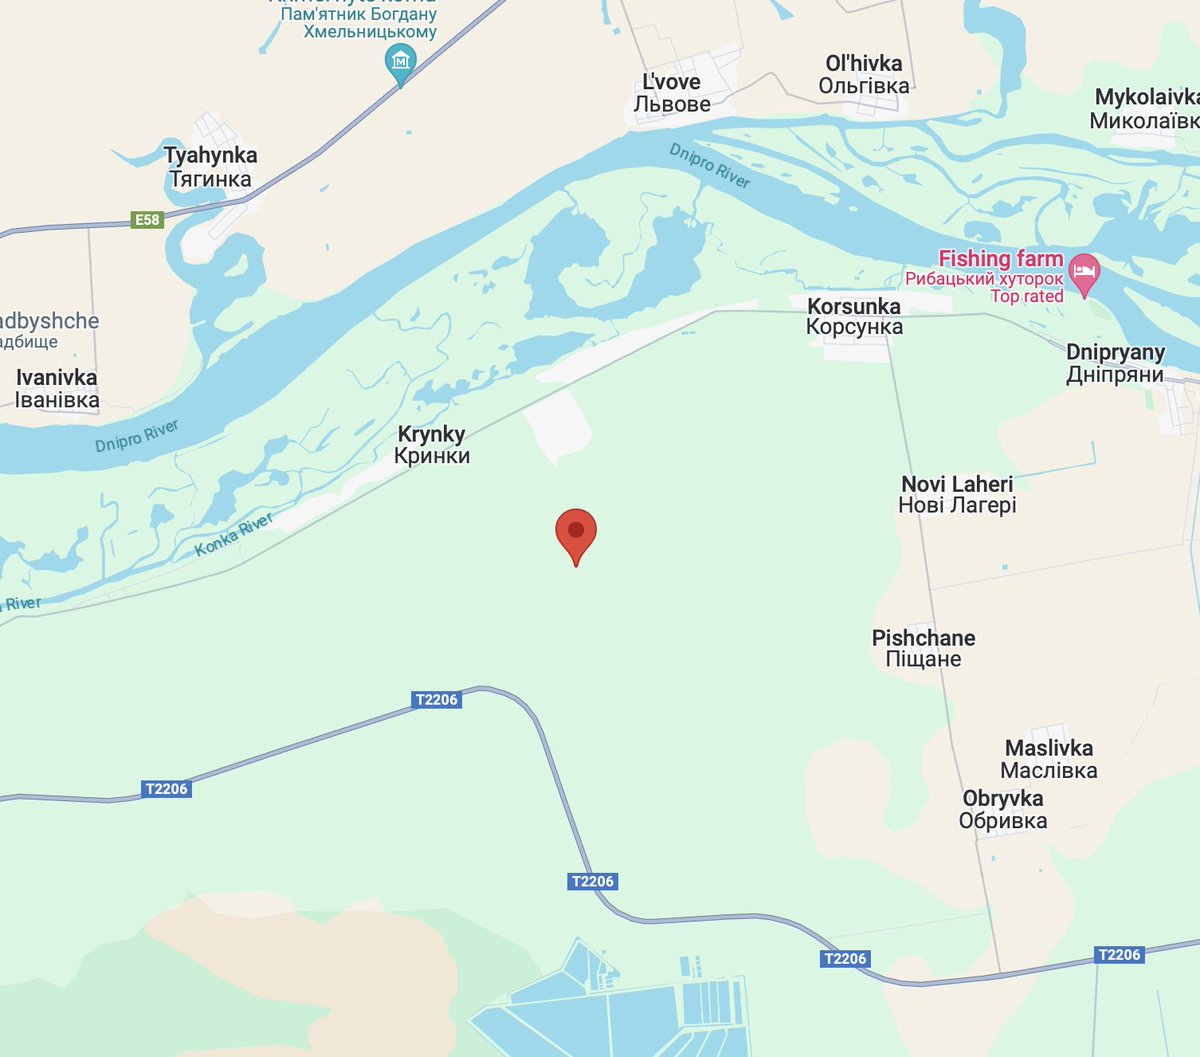 Ukrainian loitering munitions hit and destroyed a mortar firing position of Russian forces south of Krynky